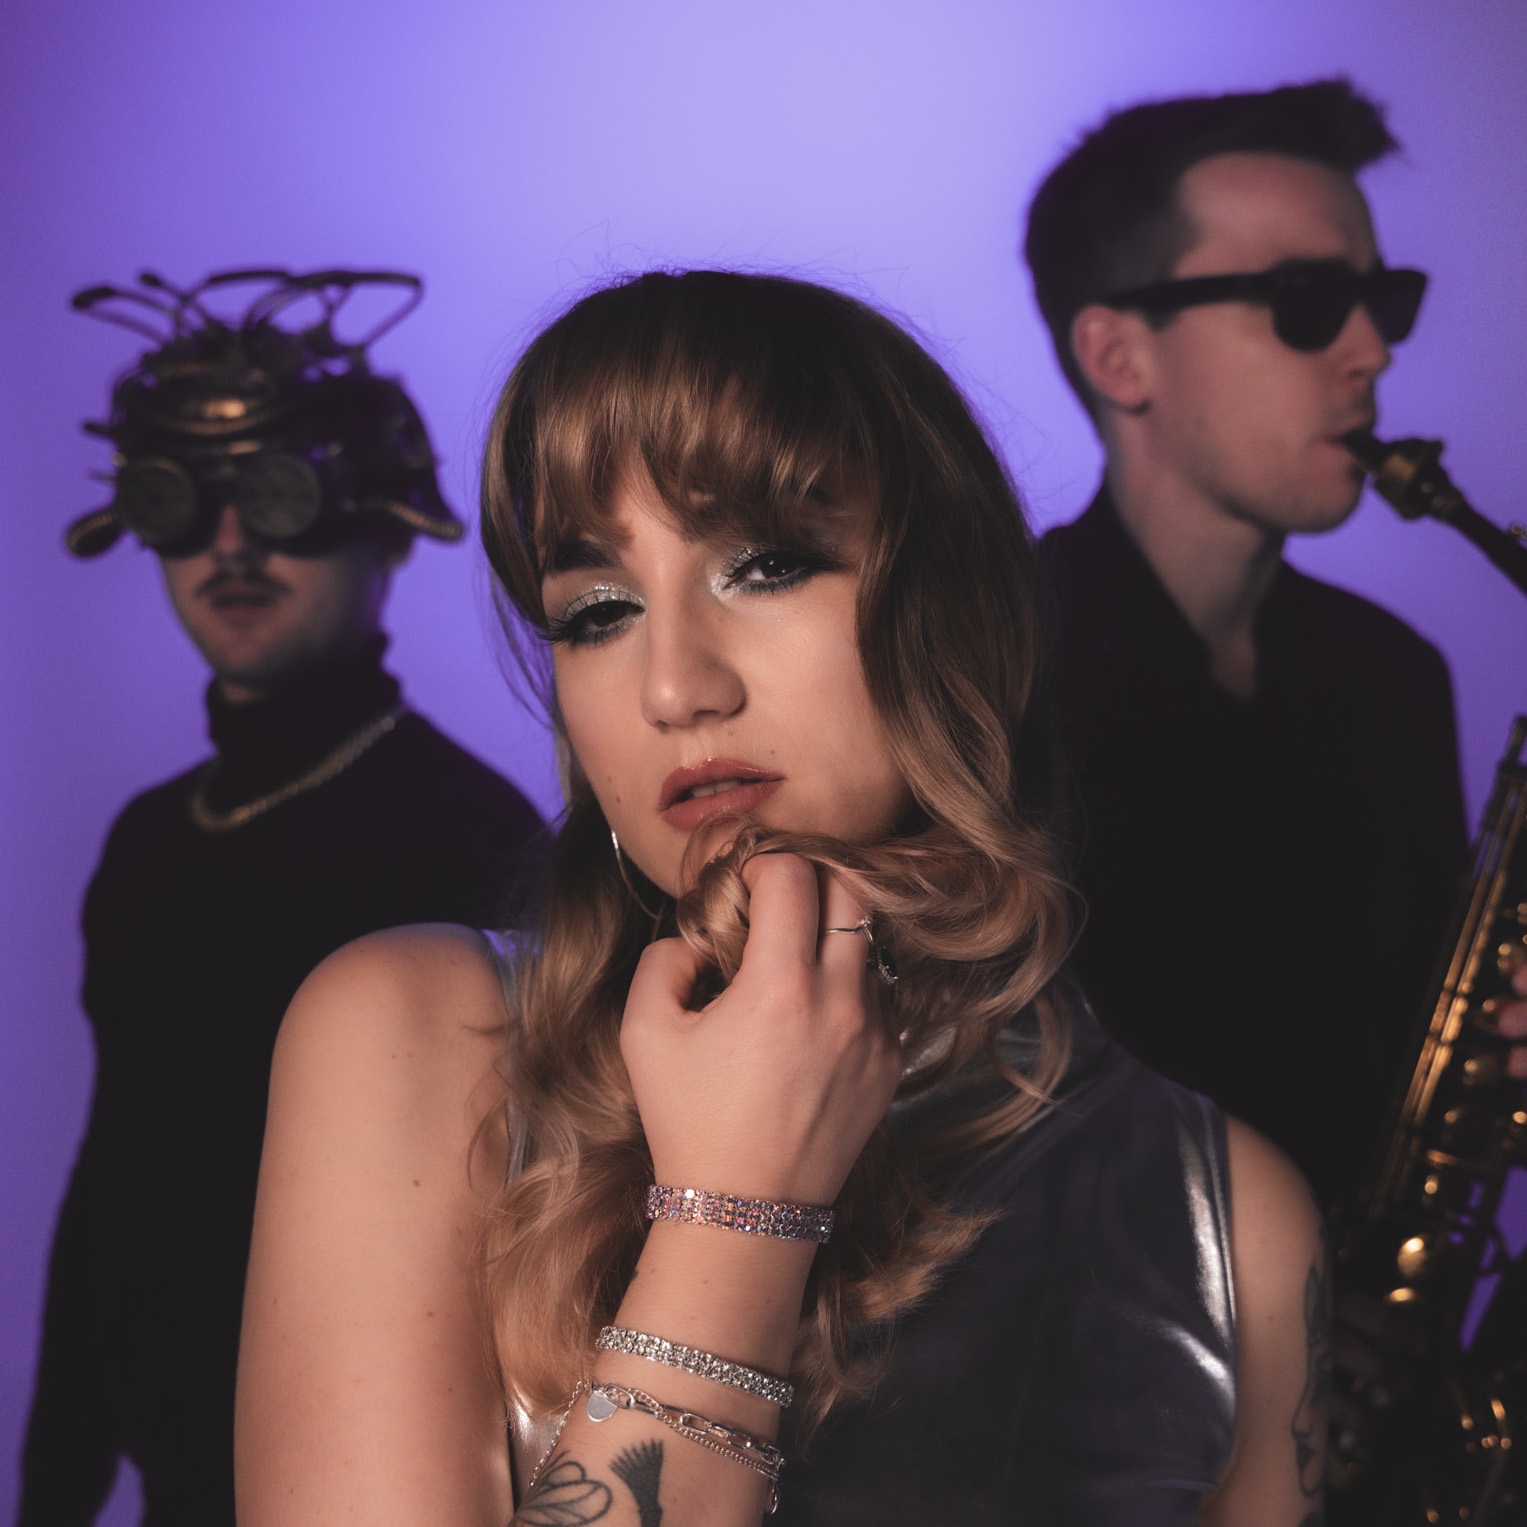 MAREYA Releases Electrifying, Sax-Infused Dance Single ‘Need You Now’ with YOUNIQUE